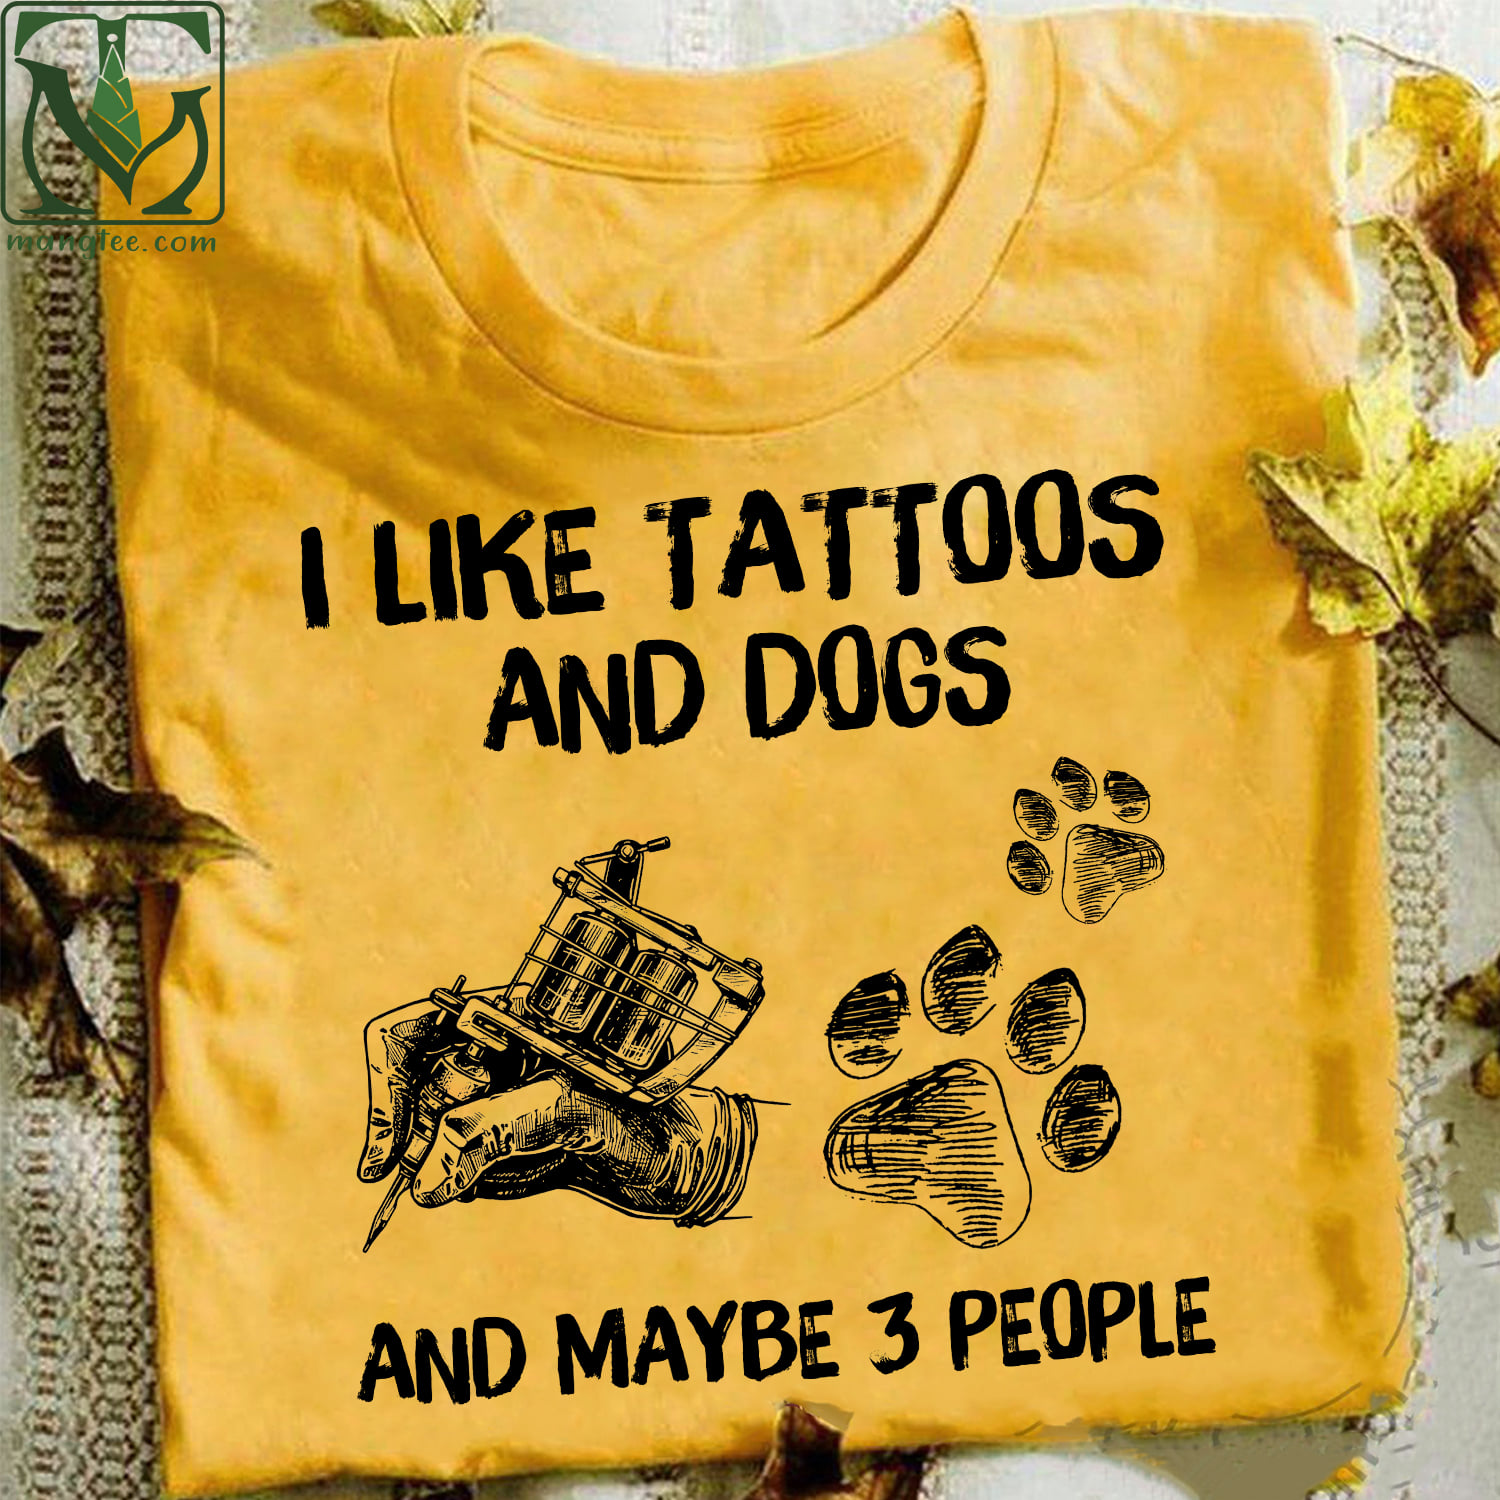 I like tattoos and dogs and maybe 3 people - Dog footprint